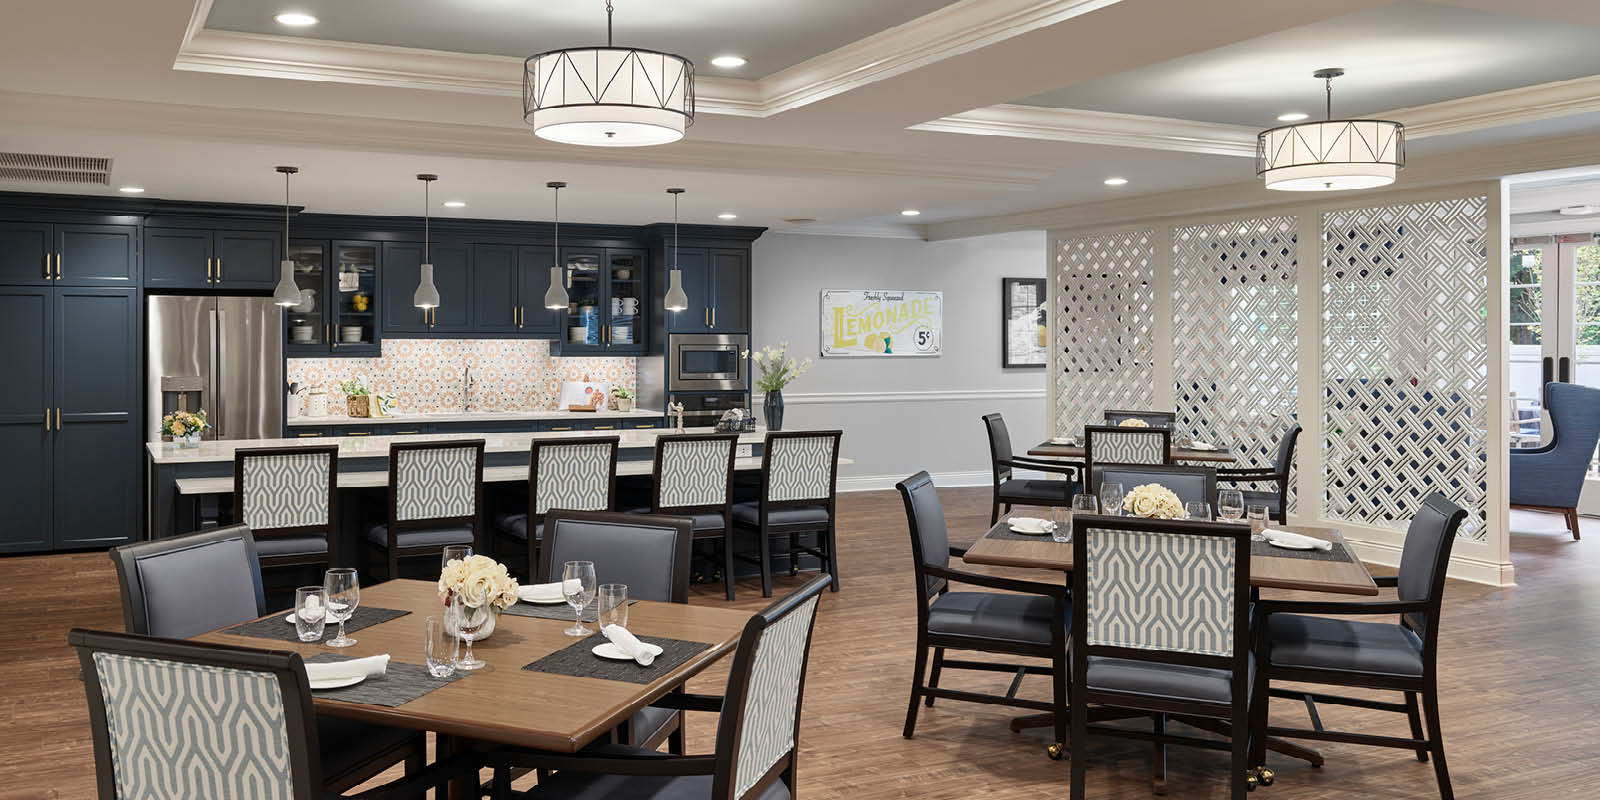 Senior living facility dining room with bar